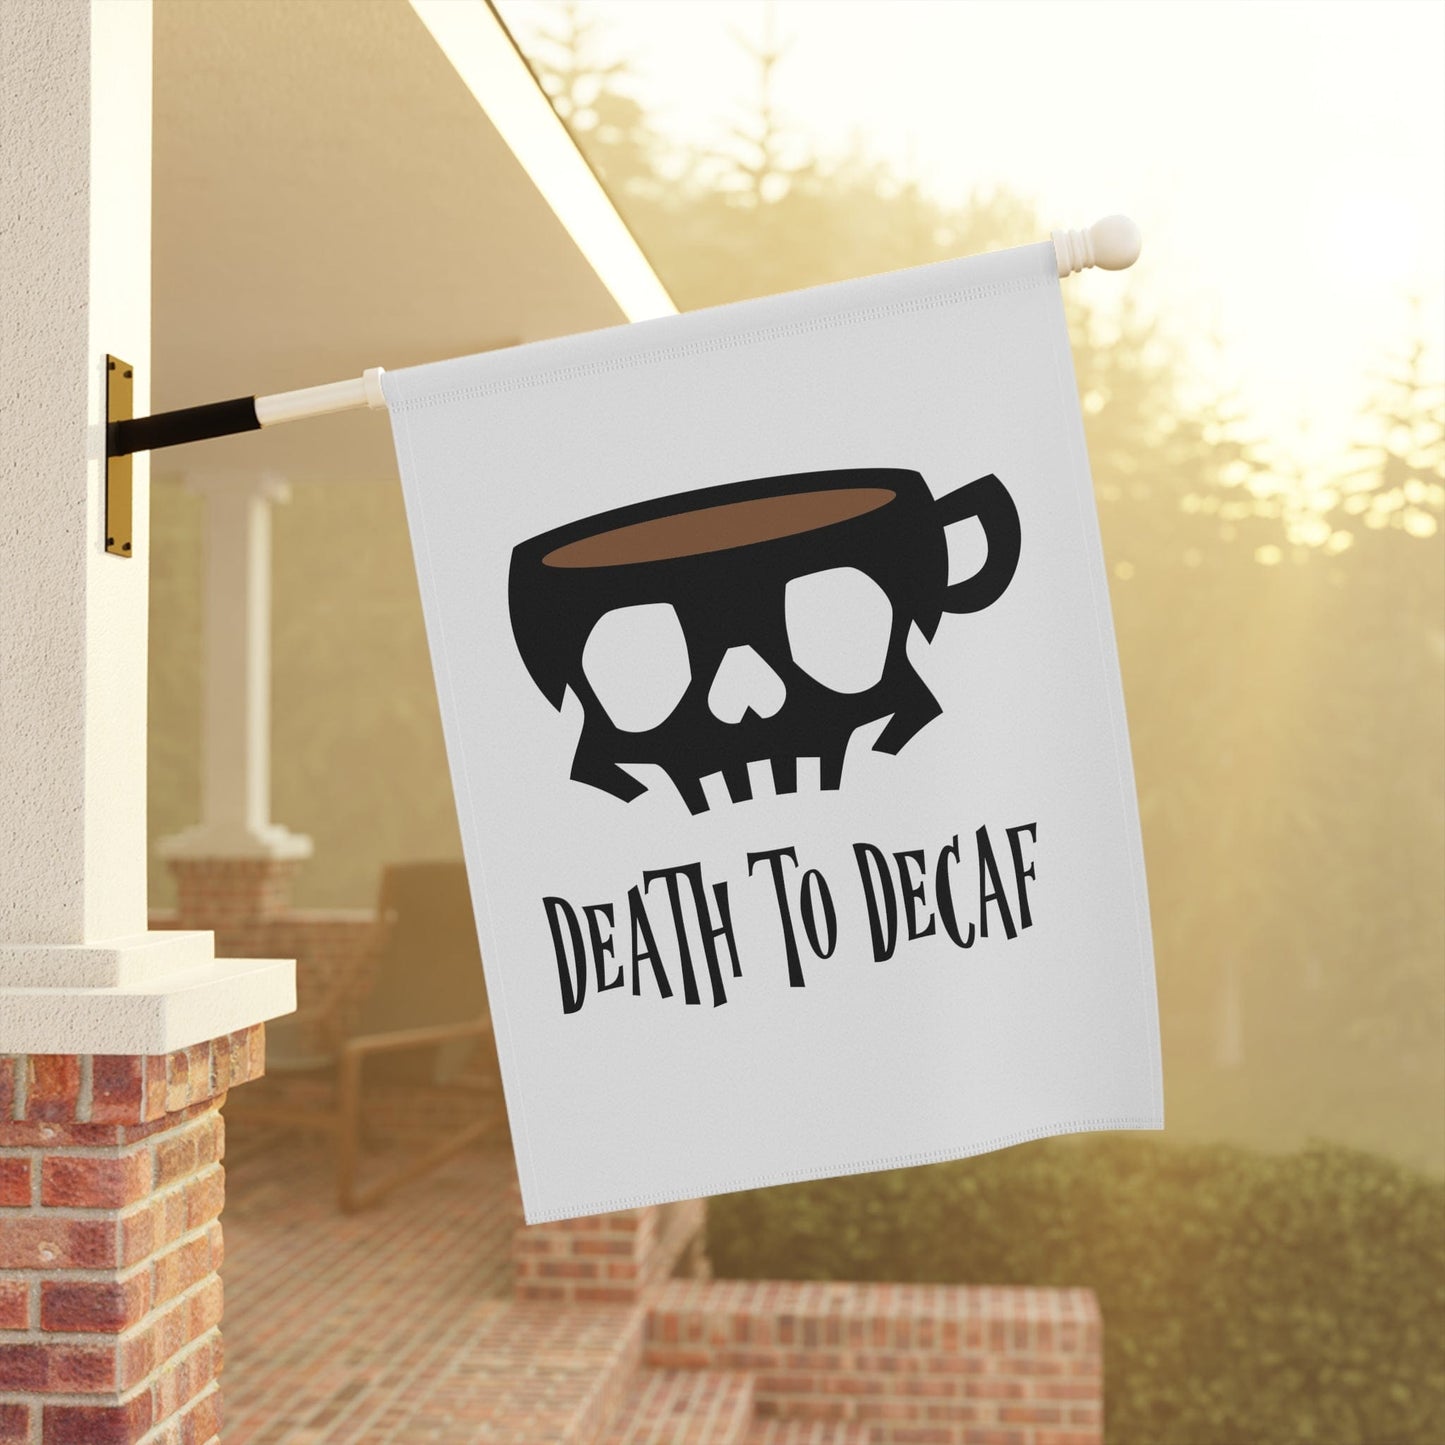 Good Bean Gifts "Death to Decaf" House Banner (White background)